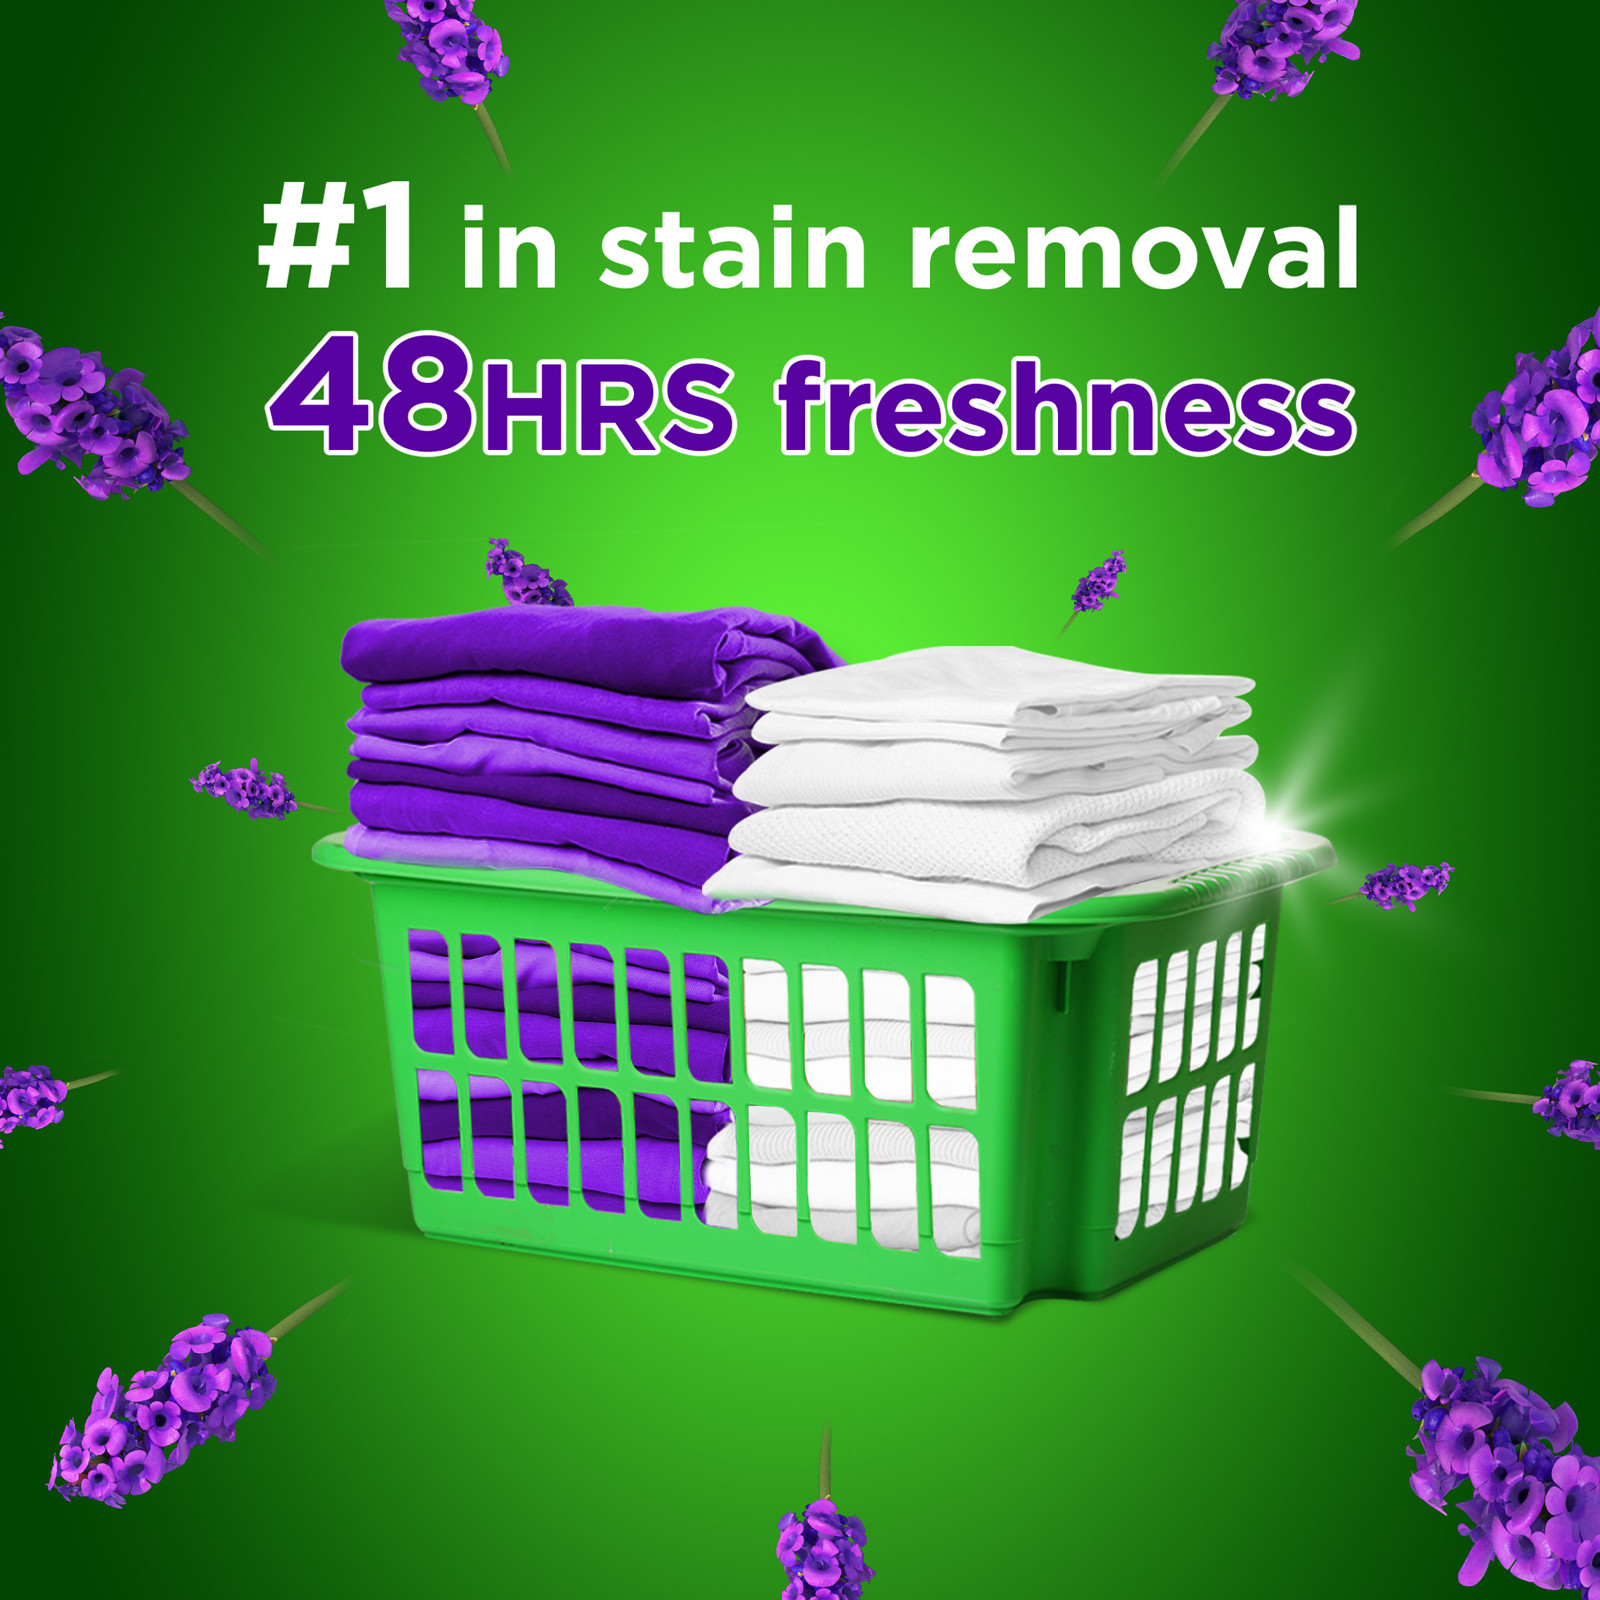 #1 in stain removal - 48hrs freshness